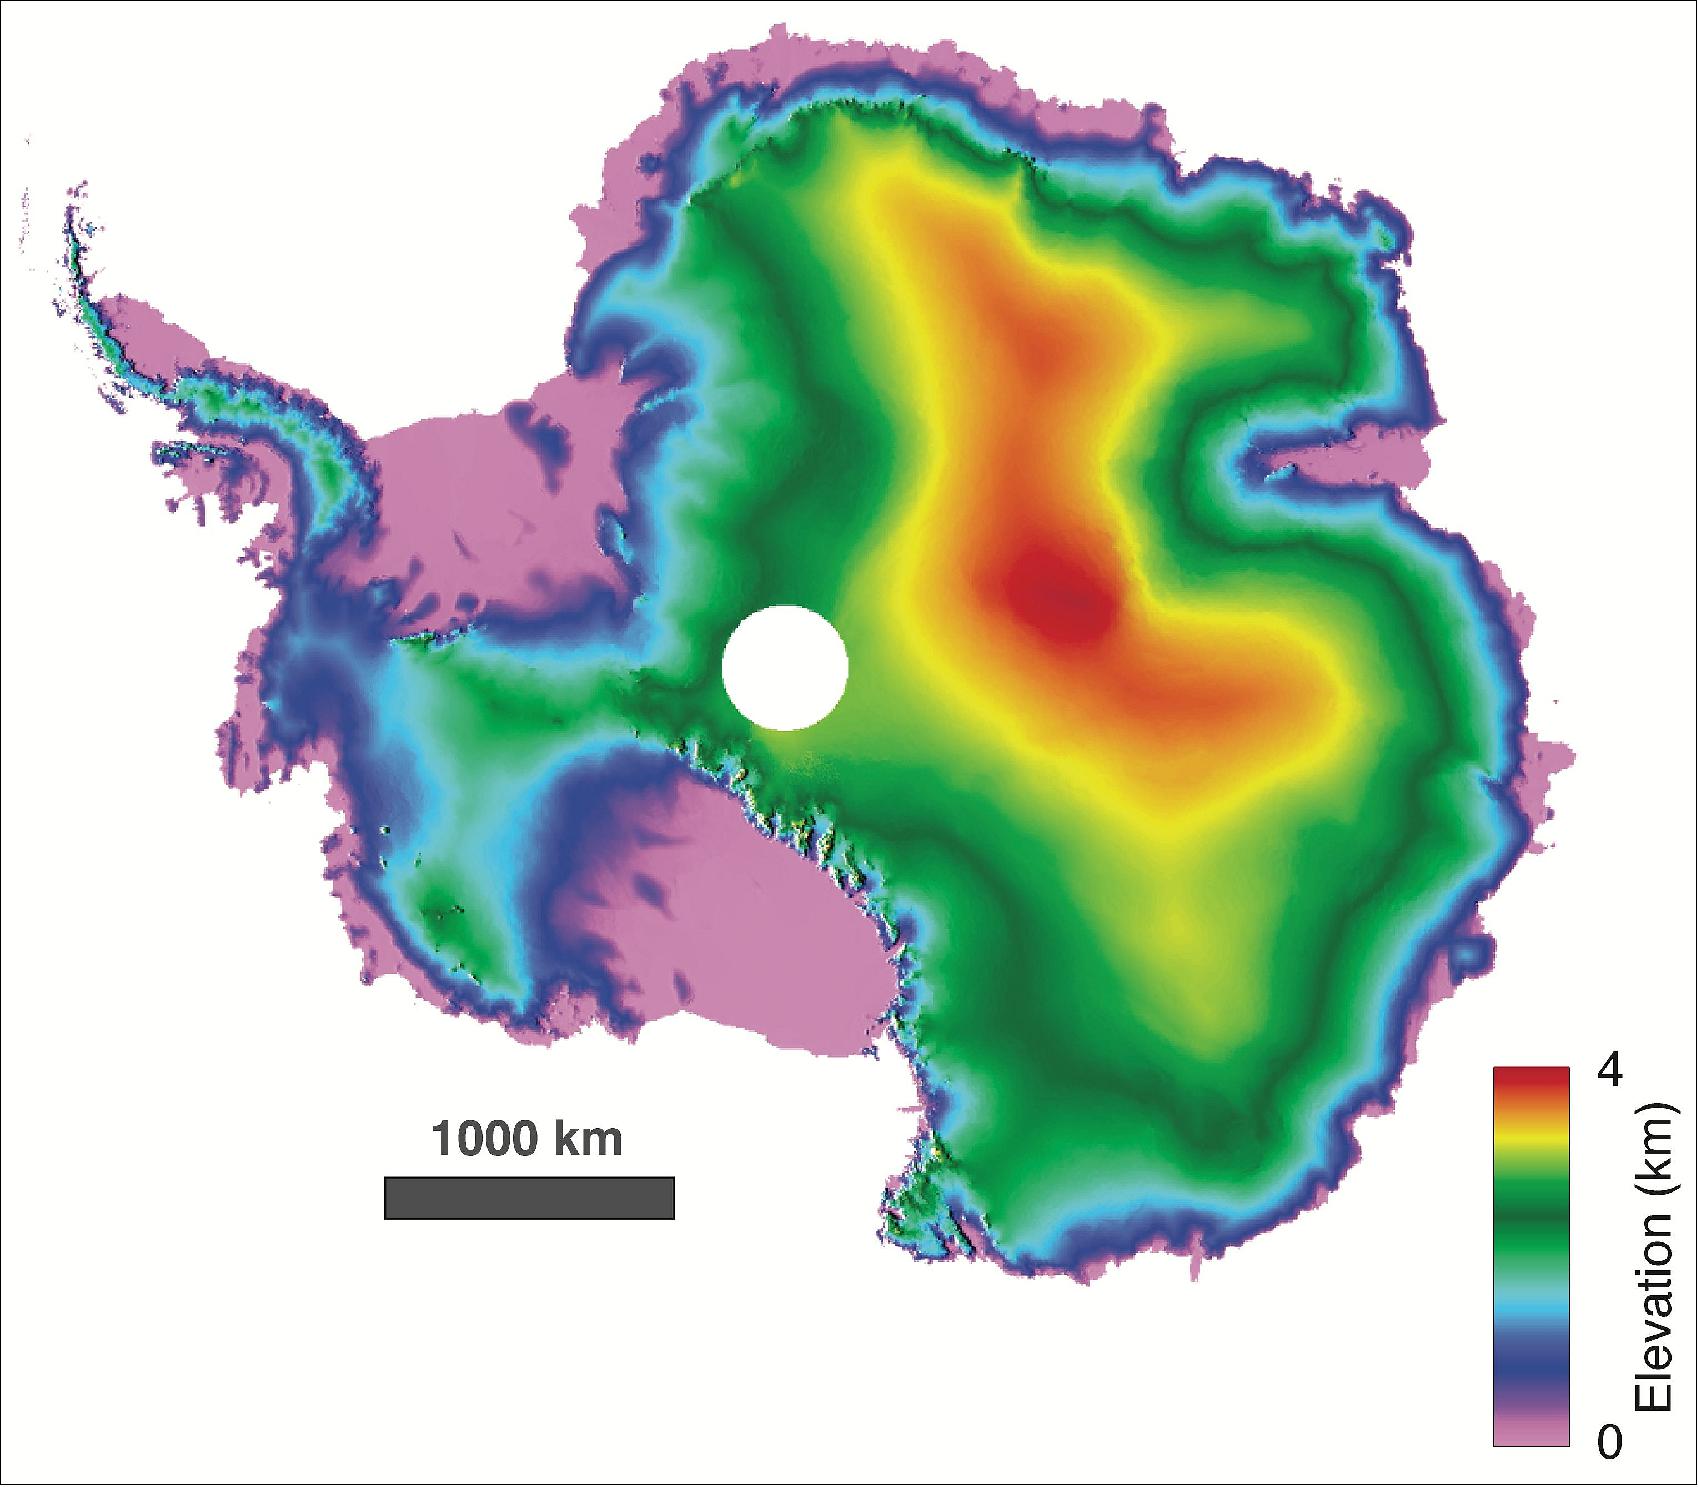 Figure 41: Antarctica detailed in 3D. A technique called 'swath processing' takes the data to a new level. Scientists have used CryoSat-2's novel ‘interferometric mode' to produce whole swaths of data and in much finer detail and faster than is gained by conventional radar altimetry. The usual spatial resolution of a few kilometers has been improved to less than 1 km (image credit: University of Edinburgh)